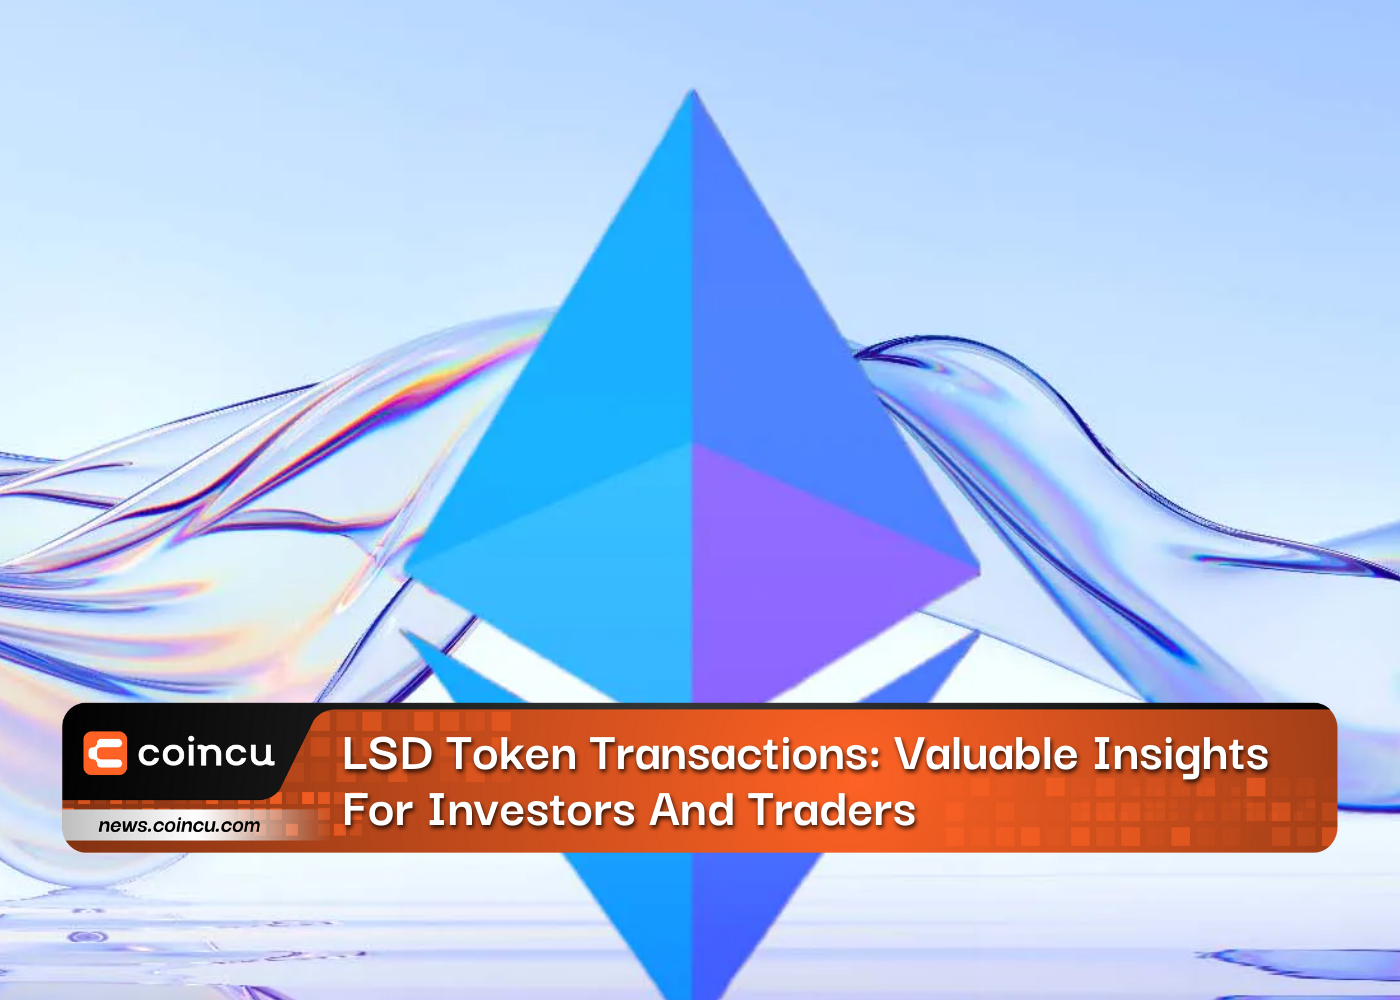 LSD Token Transactions: Valuable Insights For Investors And Traders